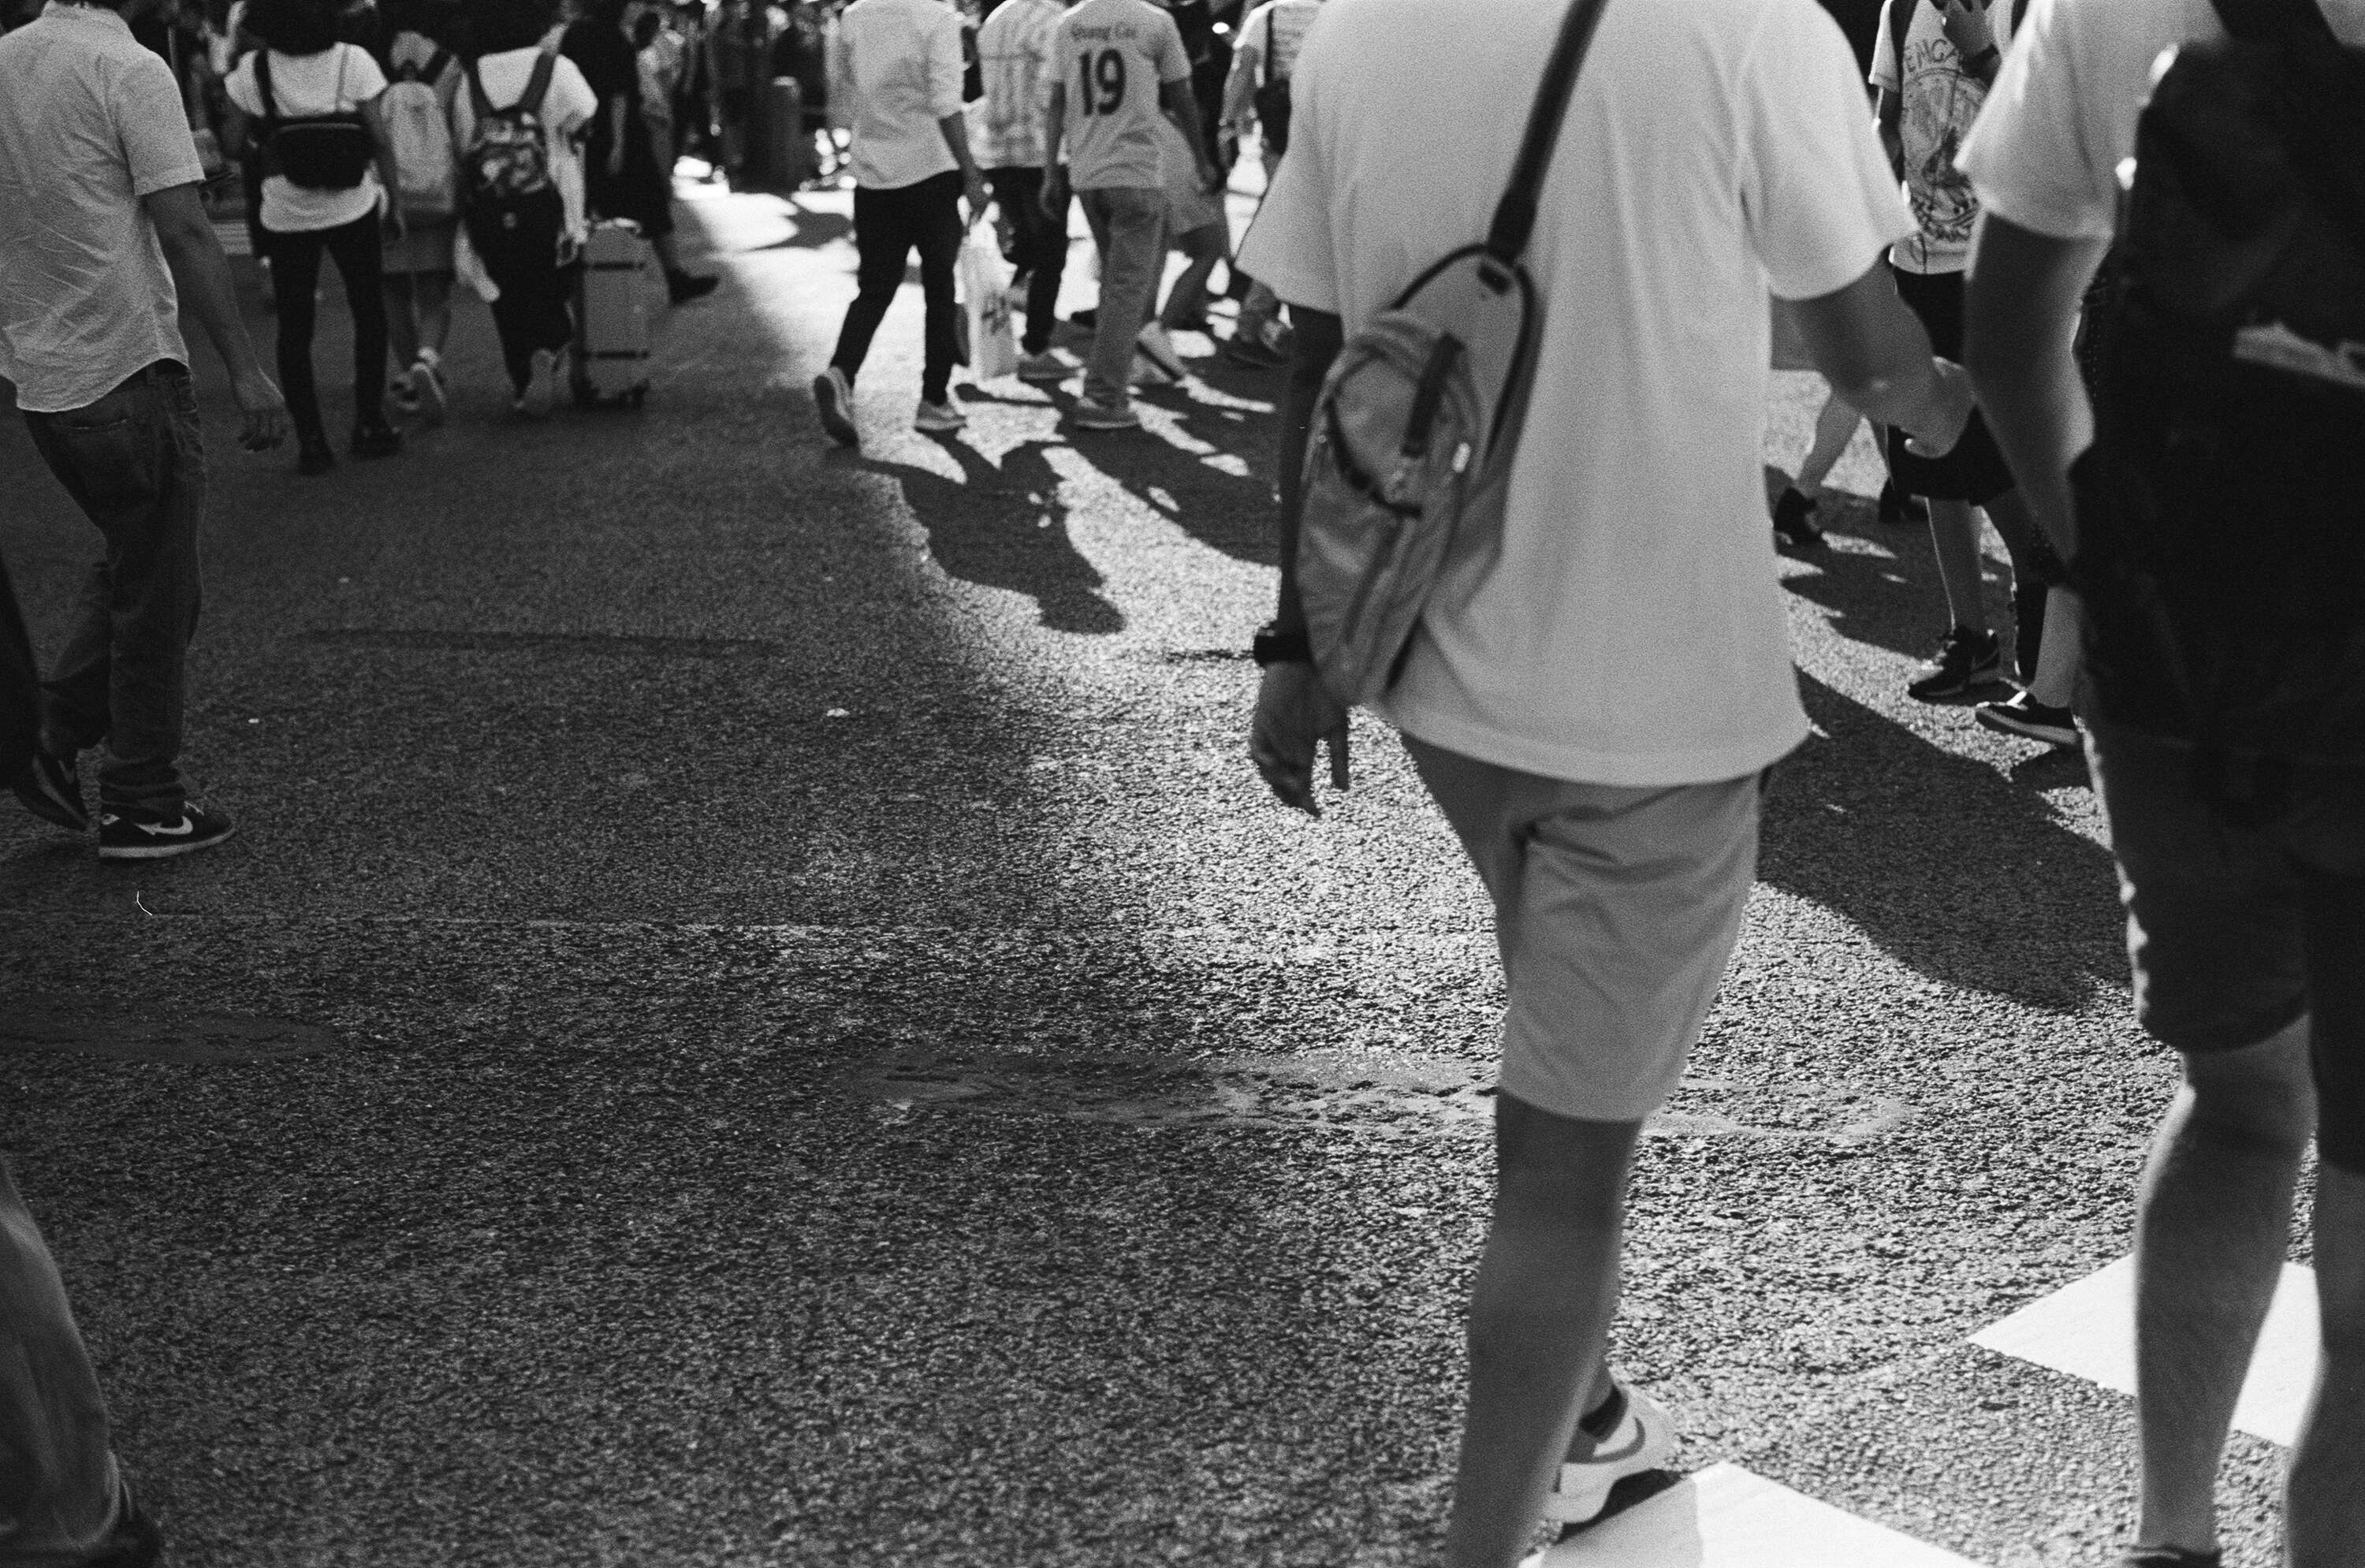 Black and white photo of a crowd of people crossing a street.